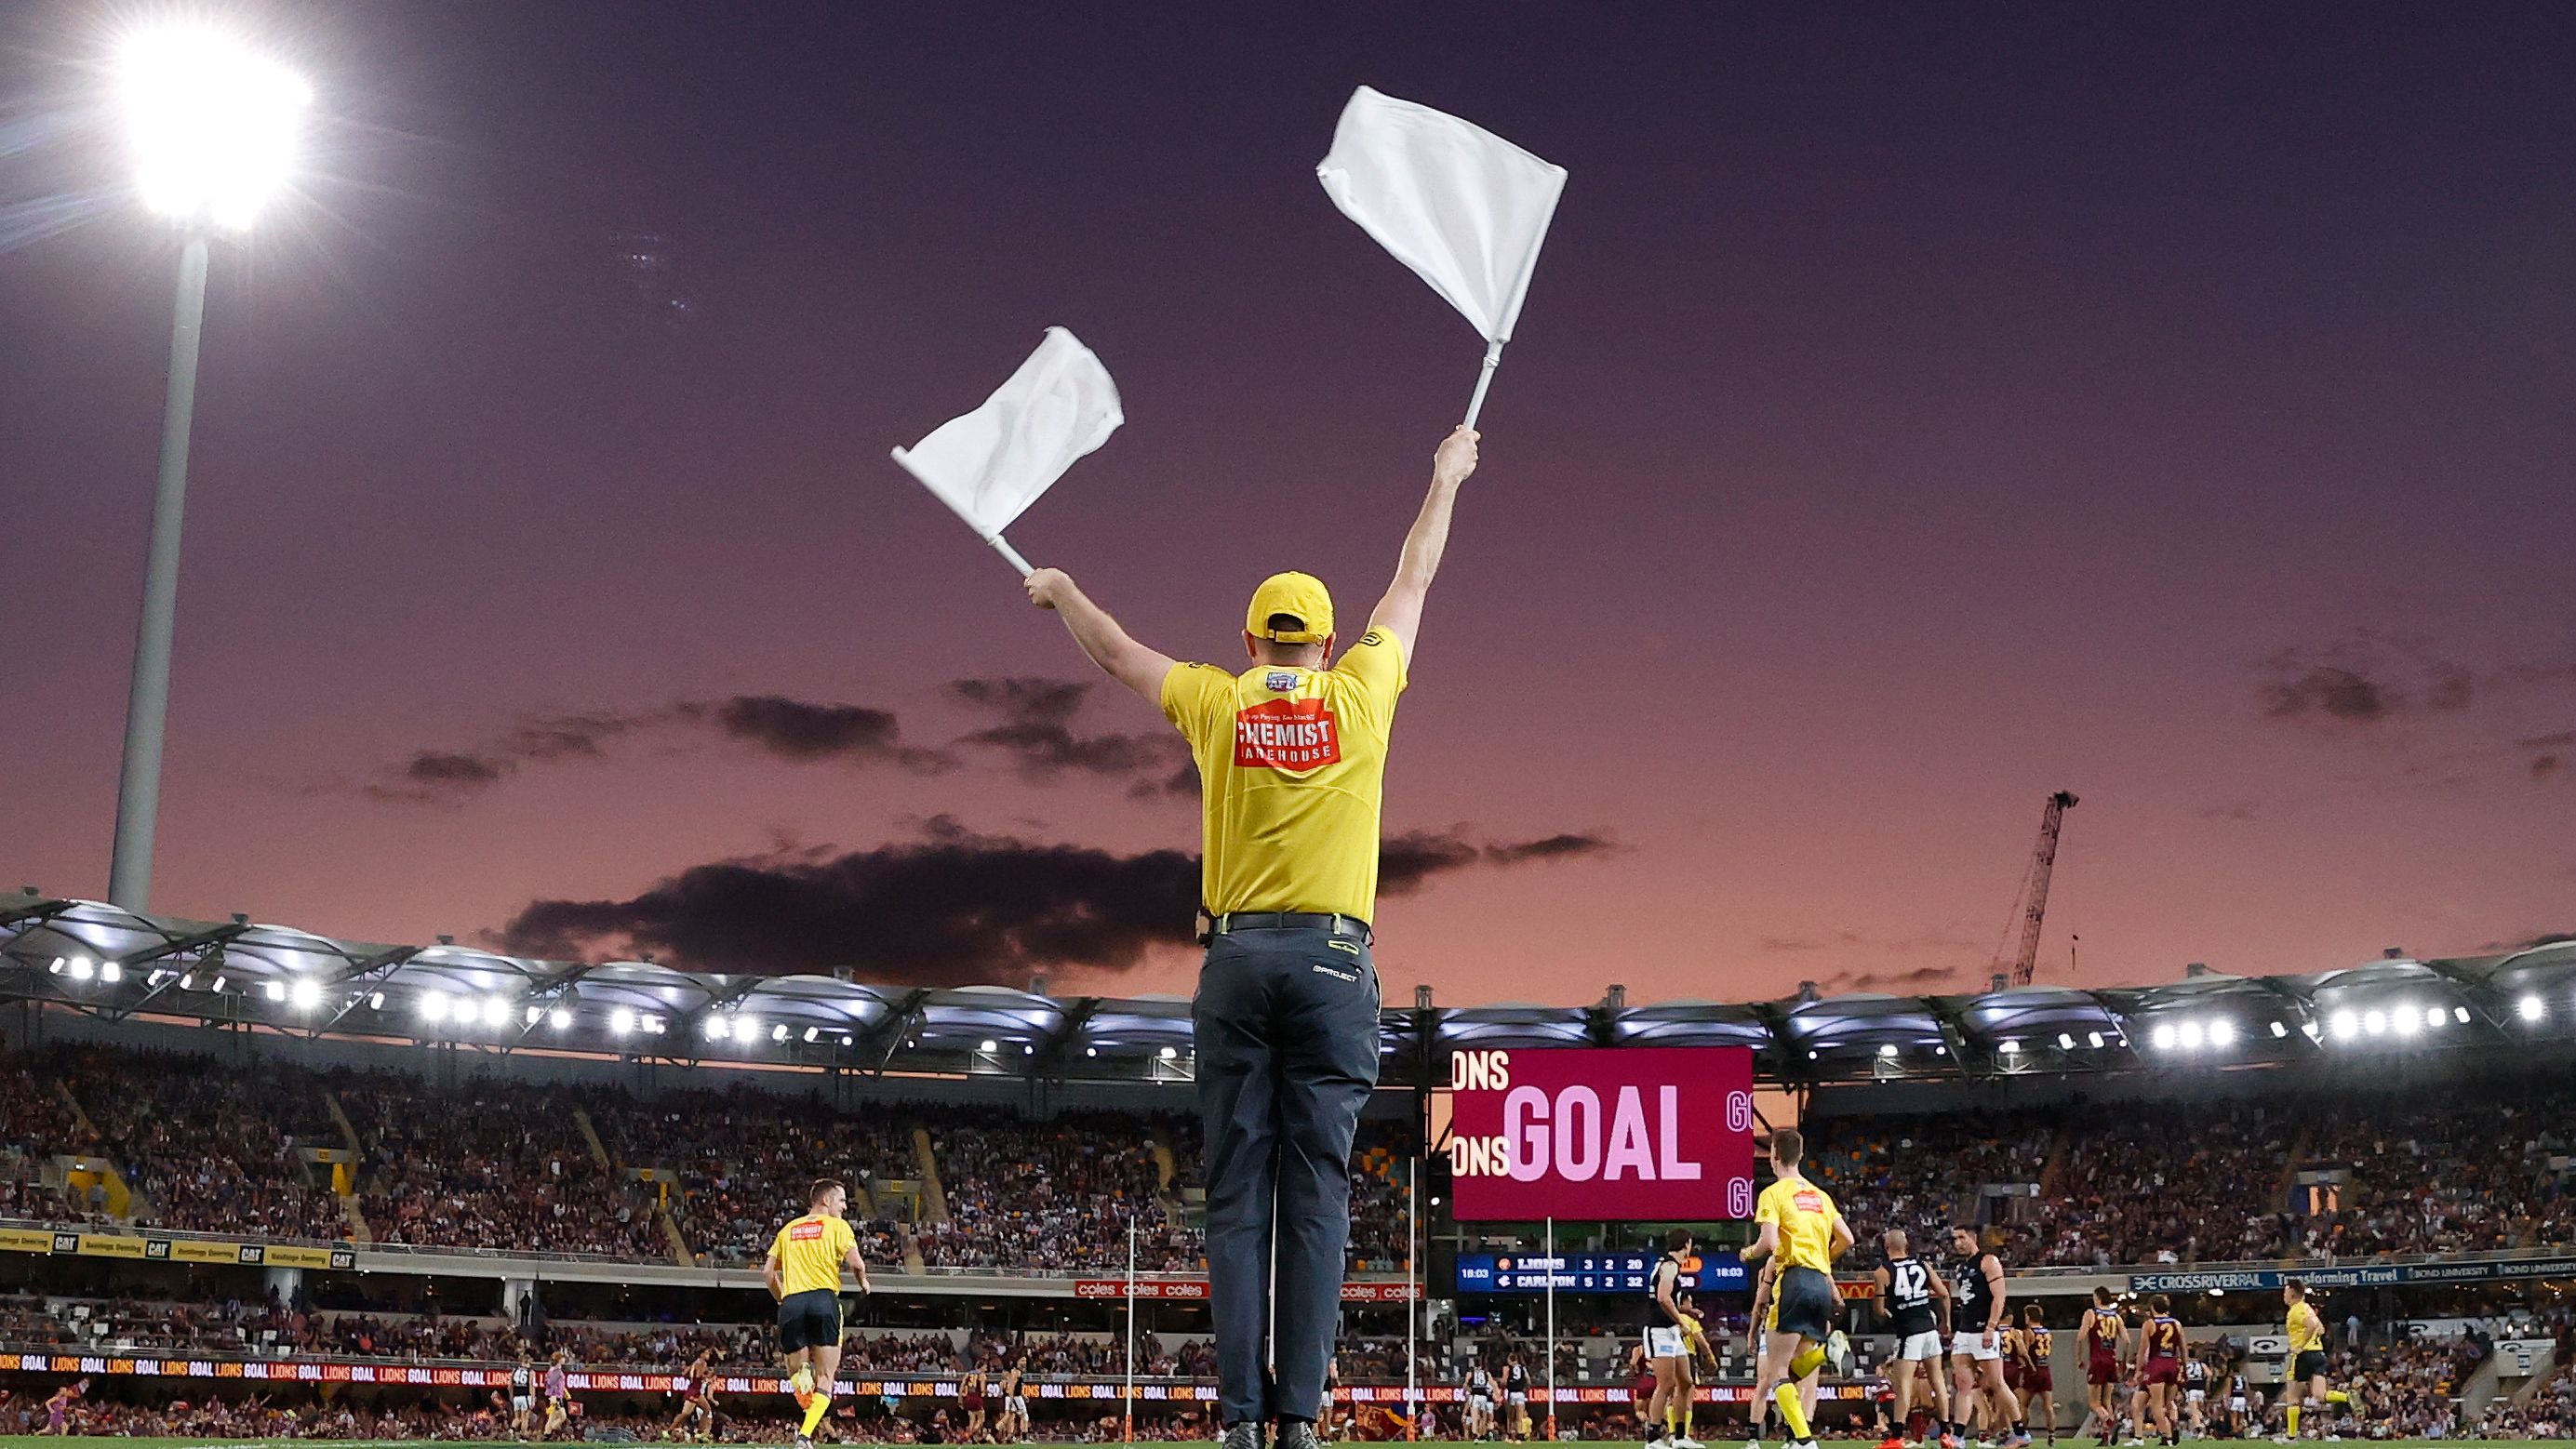 BRISBANE, AUSTRALIA - SEPTEMBER 23: The goal umpire waves his flags during the 2023 AFL Second Preliminary Final match between the Brisbane Lions and the Carlton Blues at The Gabba on September 23, 2023 in Brisbane, Australia. (Photo by Michael Willson/AFL Photos via Getty Images)